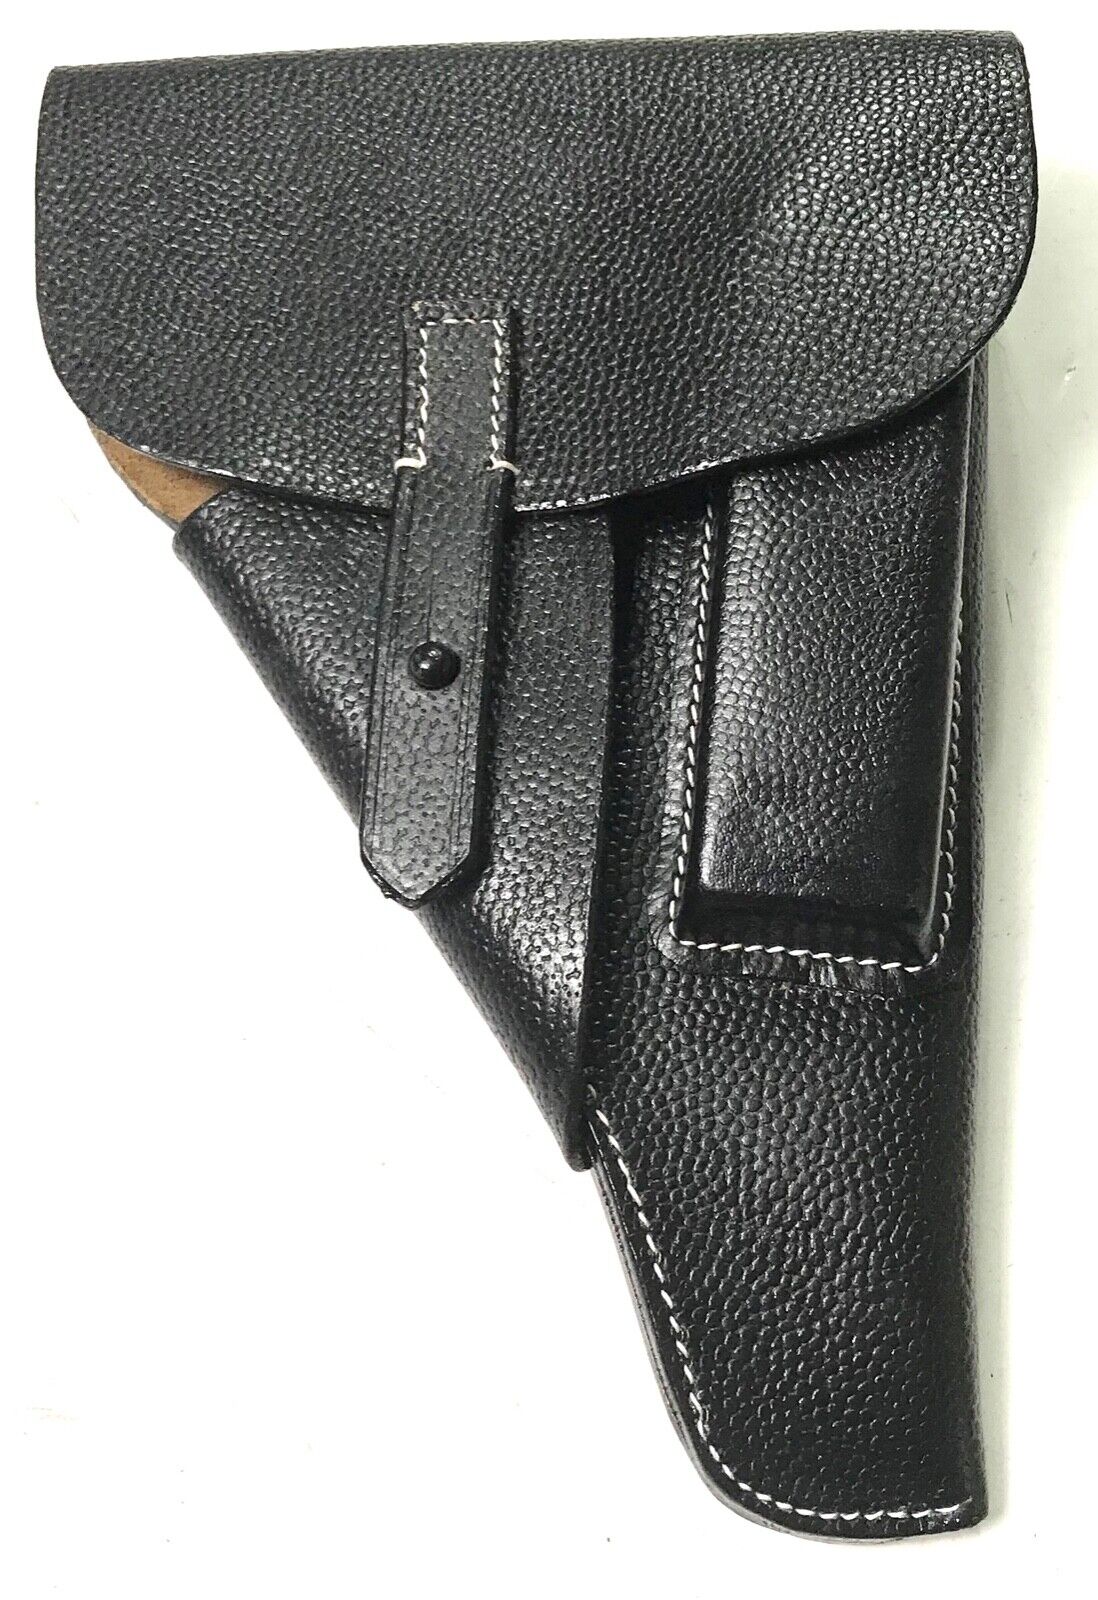  WWII GERMAN WALTHER P38 SHOFTSHELL PISTOL HOLSTER -BLACK PEBBLED LEATHER